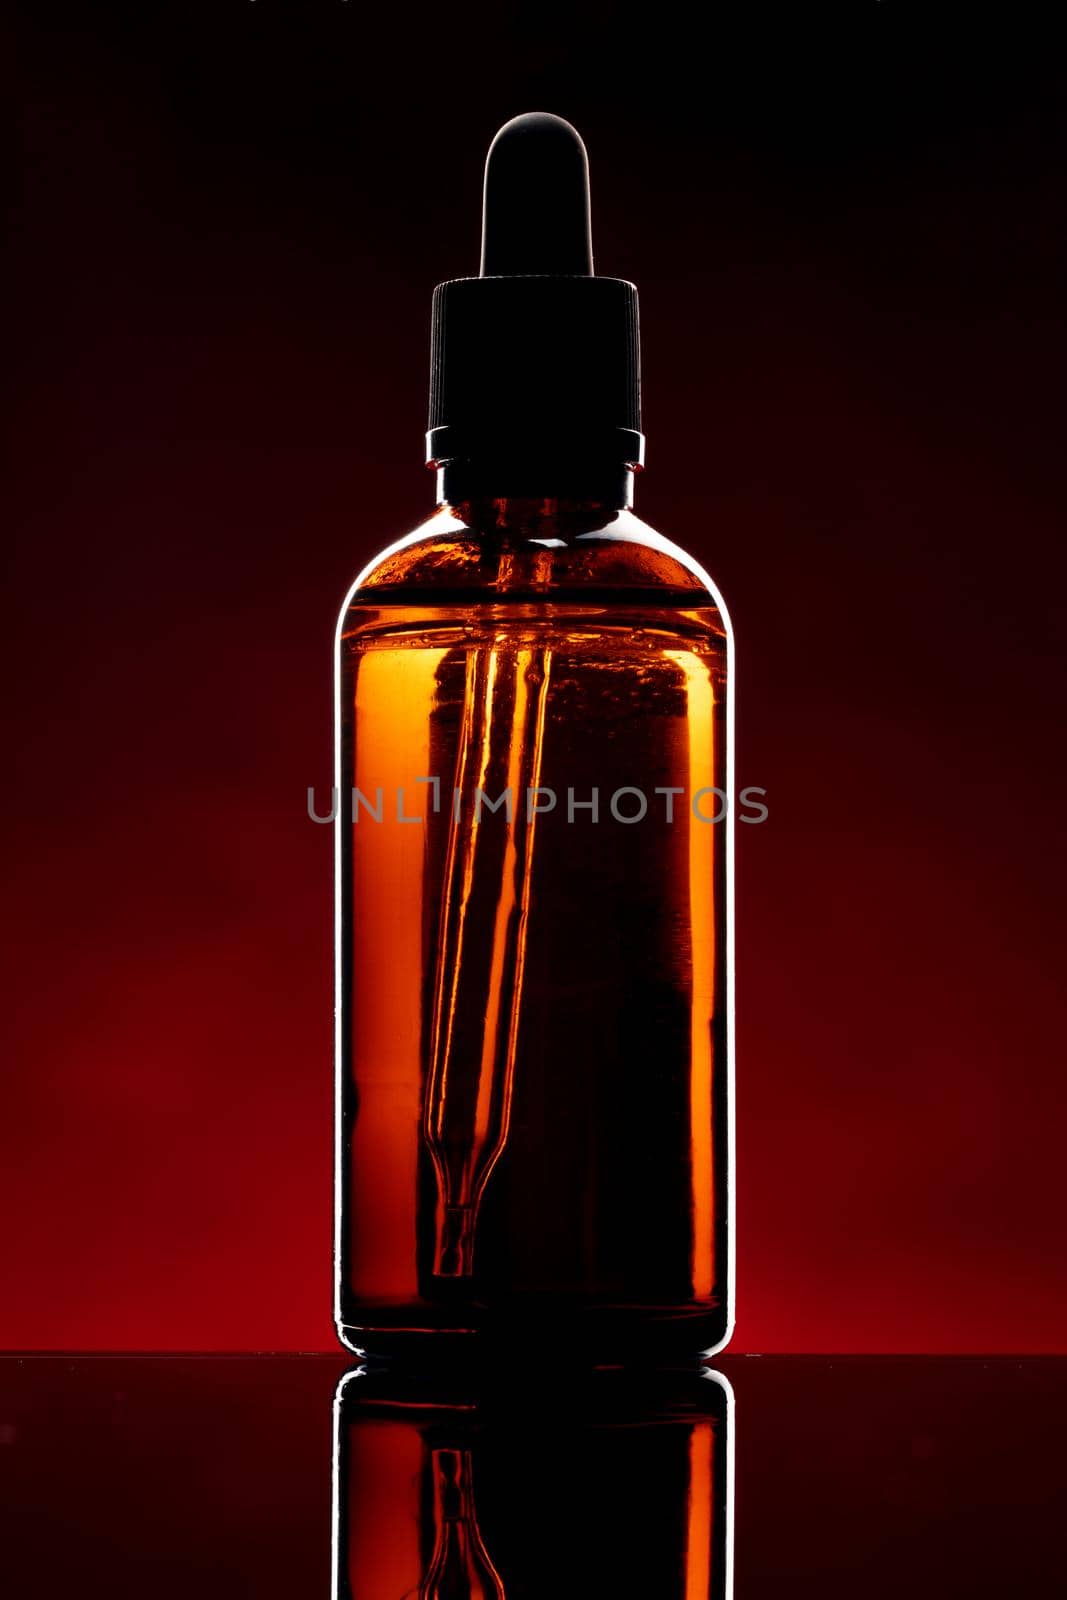 Glass bottle with cosmetic oil on dark background by Fabrikasimf